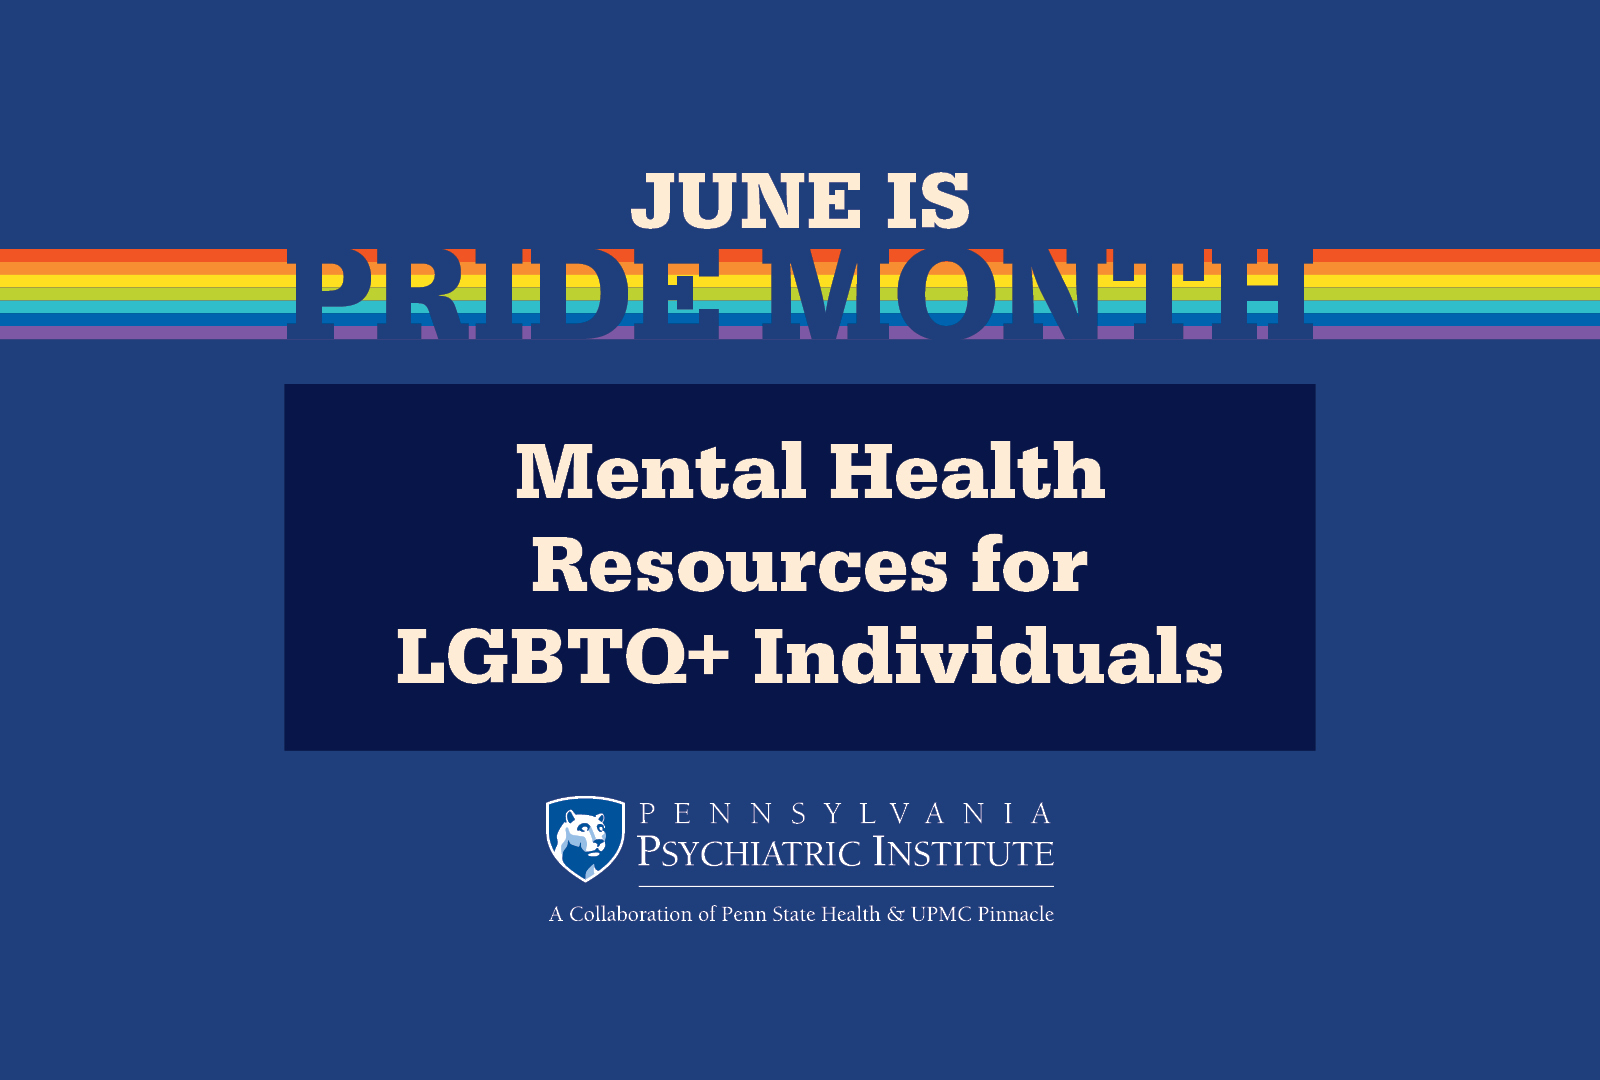 Mental Health Resources for LGBTQ+ Individuals in Central PA